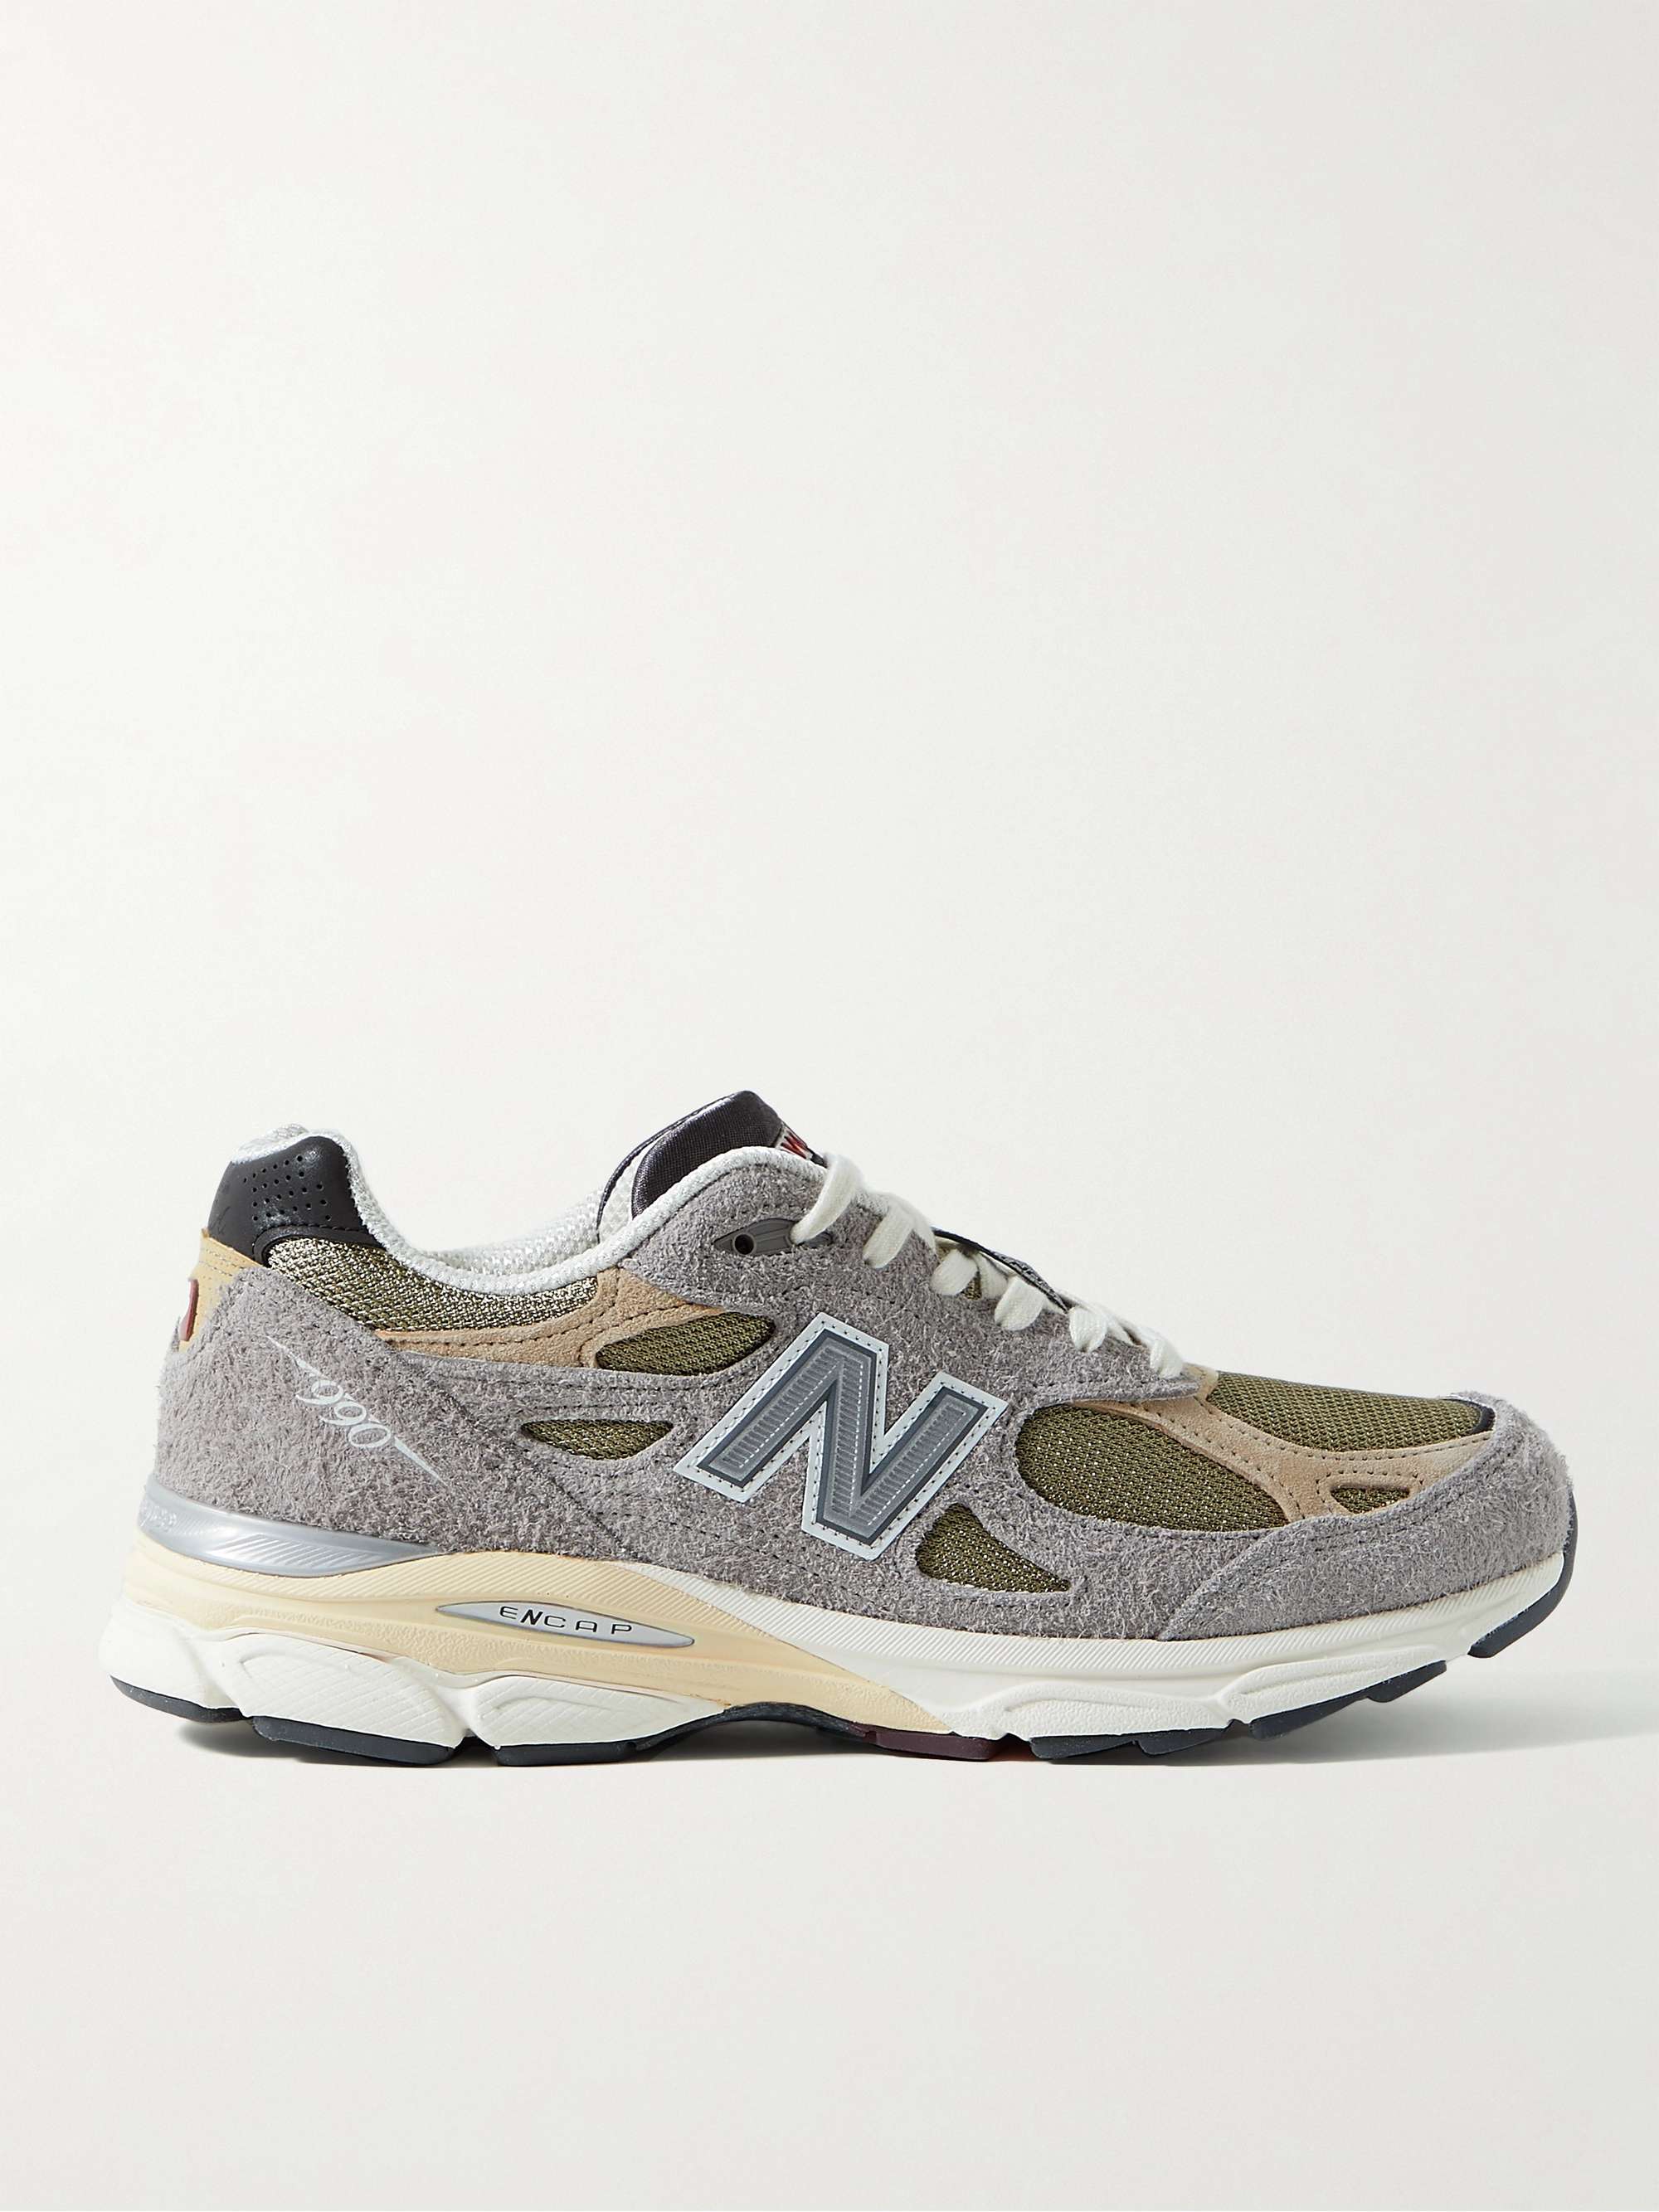 NEW BALANCE M990v3 Suede, Mesh and Leather Sneakers